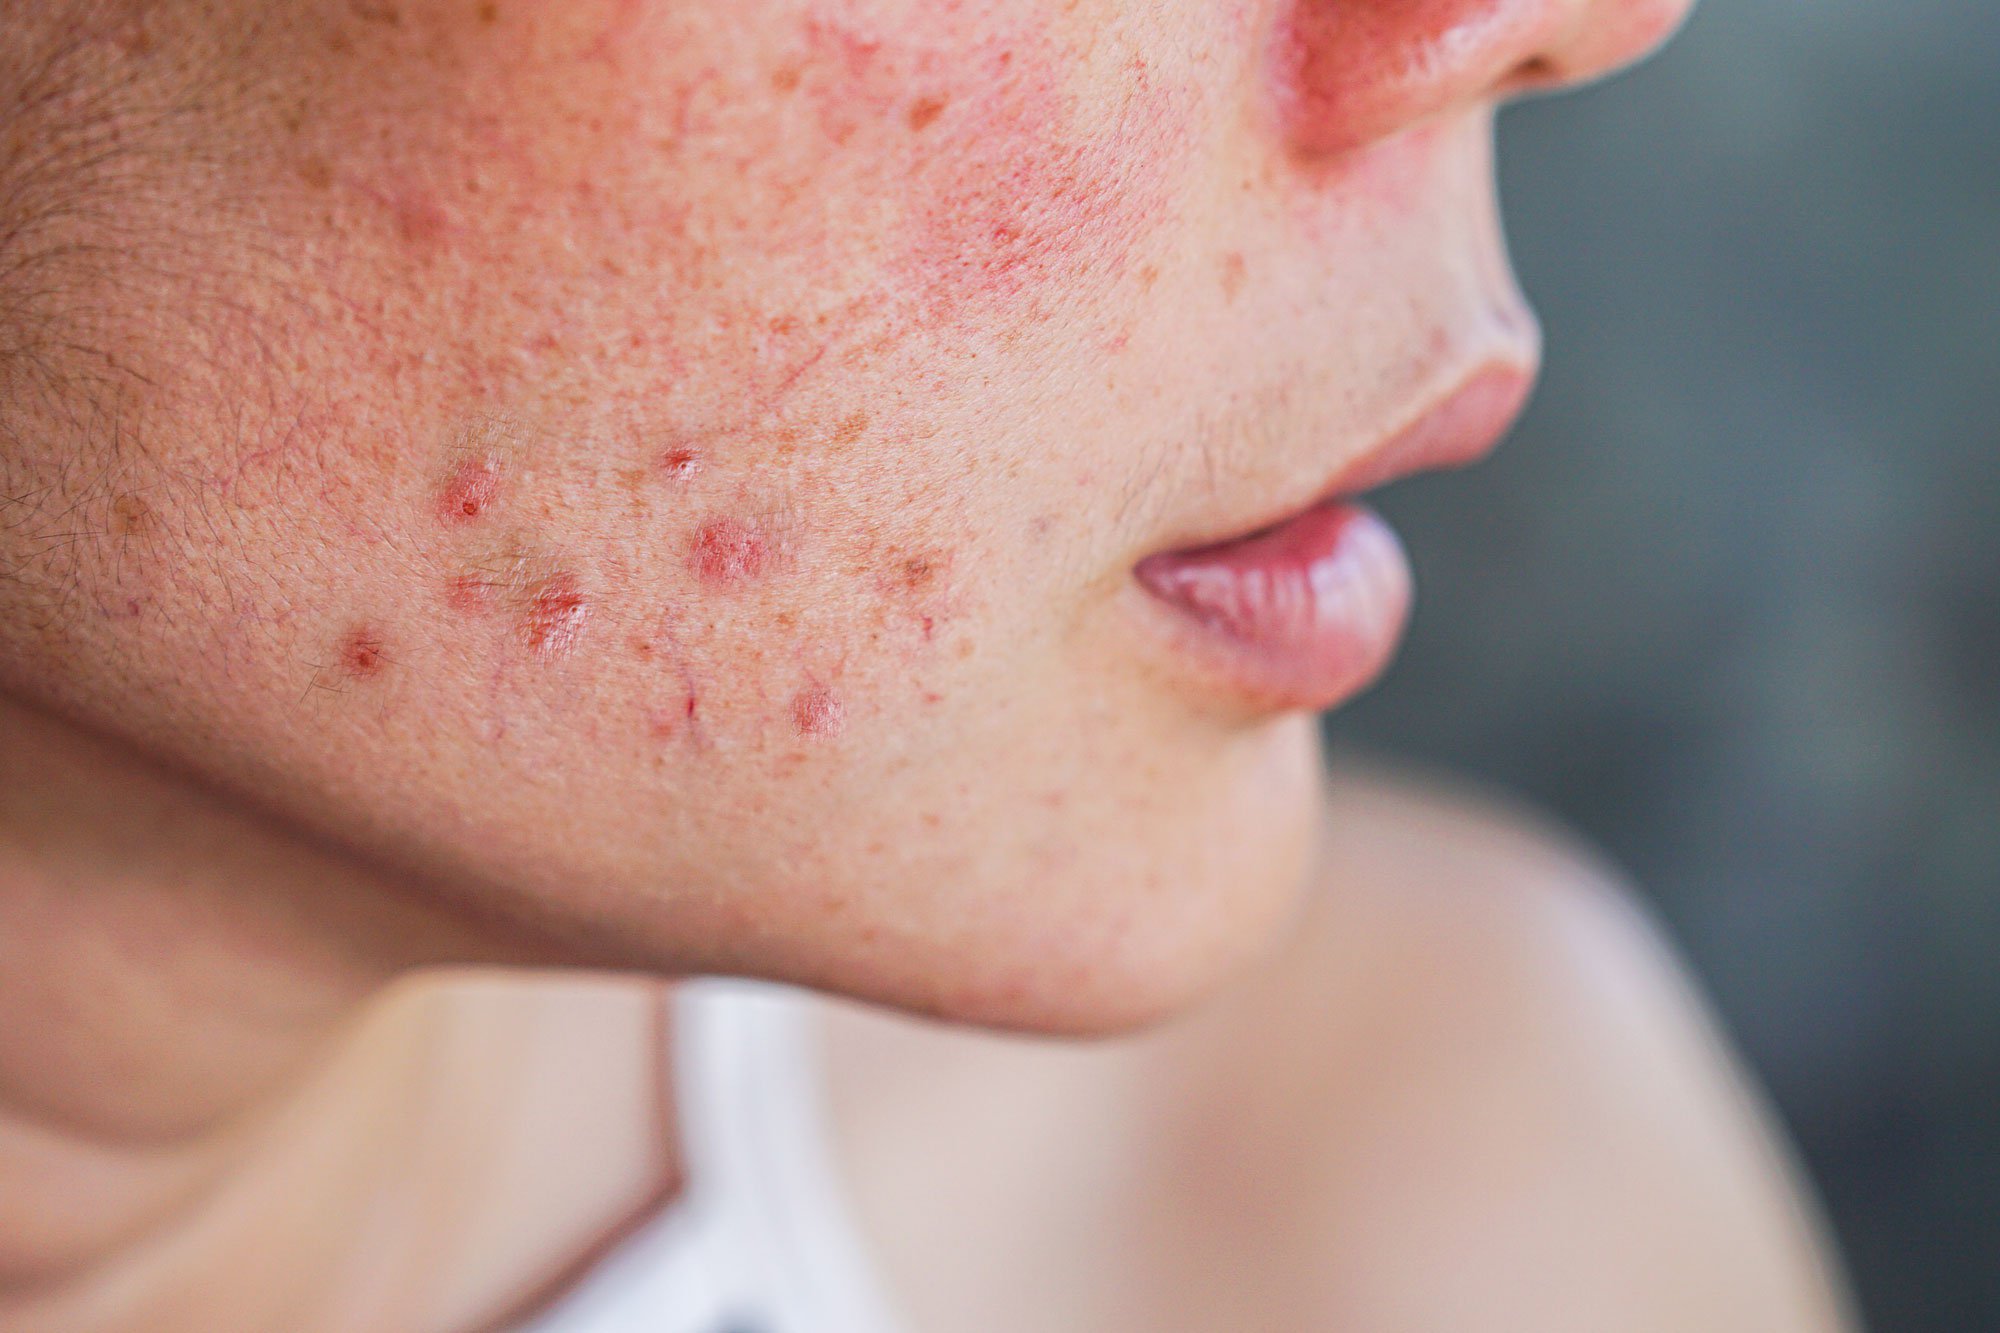 Woman's face with acne